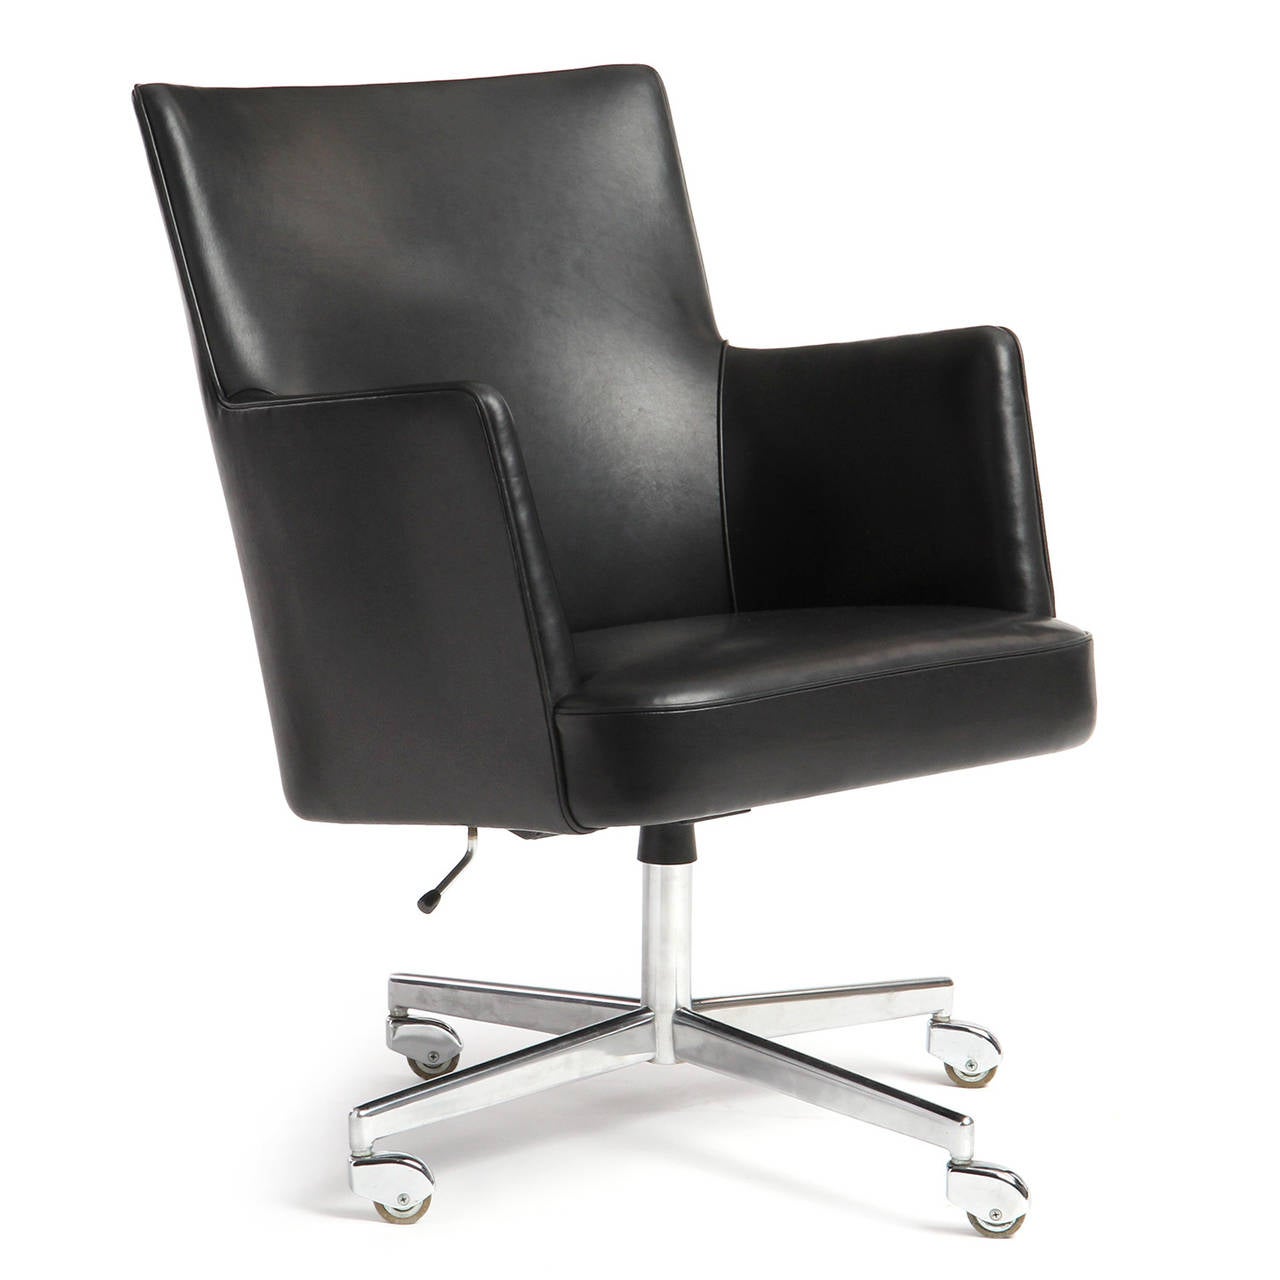 An uncommon swivelling and tilting generously proportioned desk chair having fitted black leather upholstery and a four-pronged brushed steel base on chrome-hooded casters.